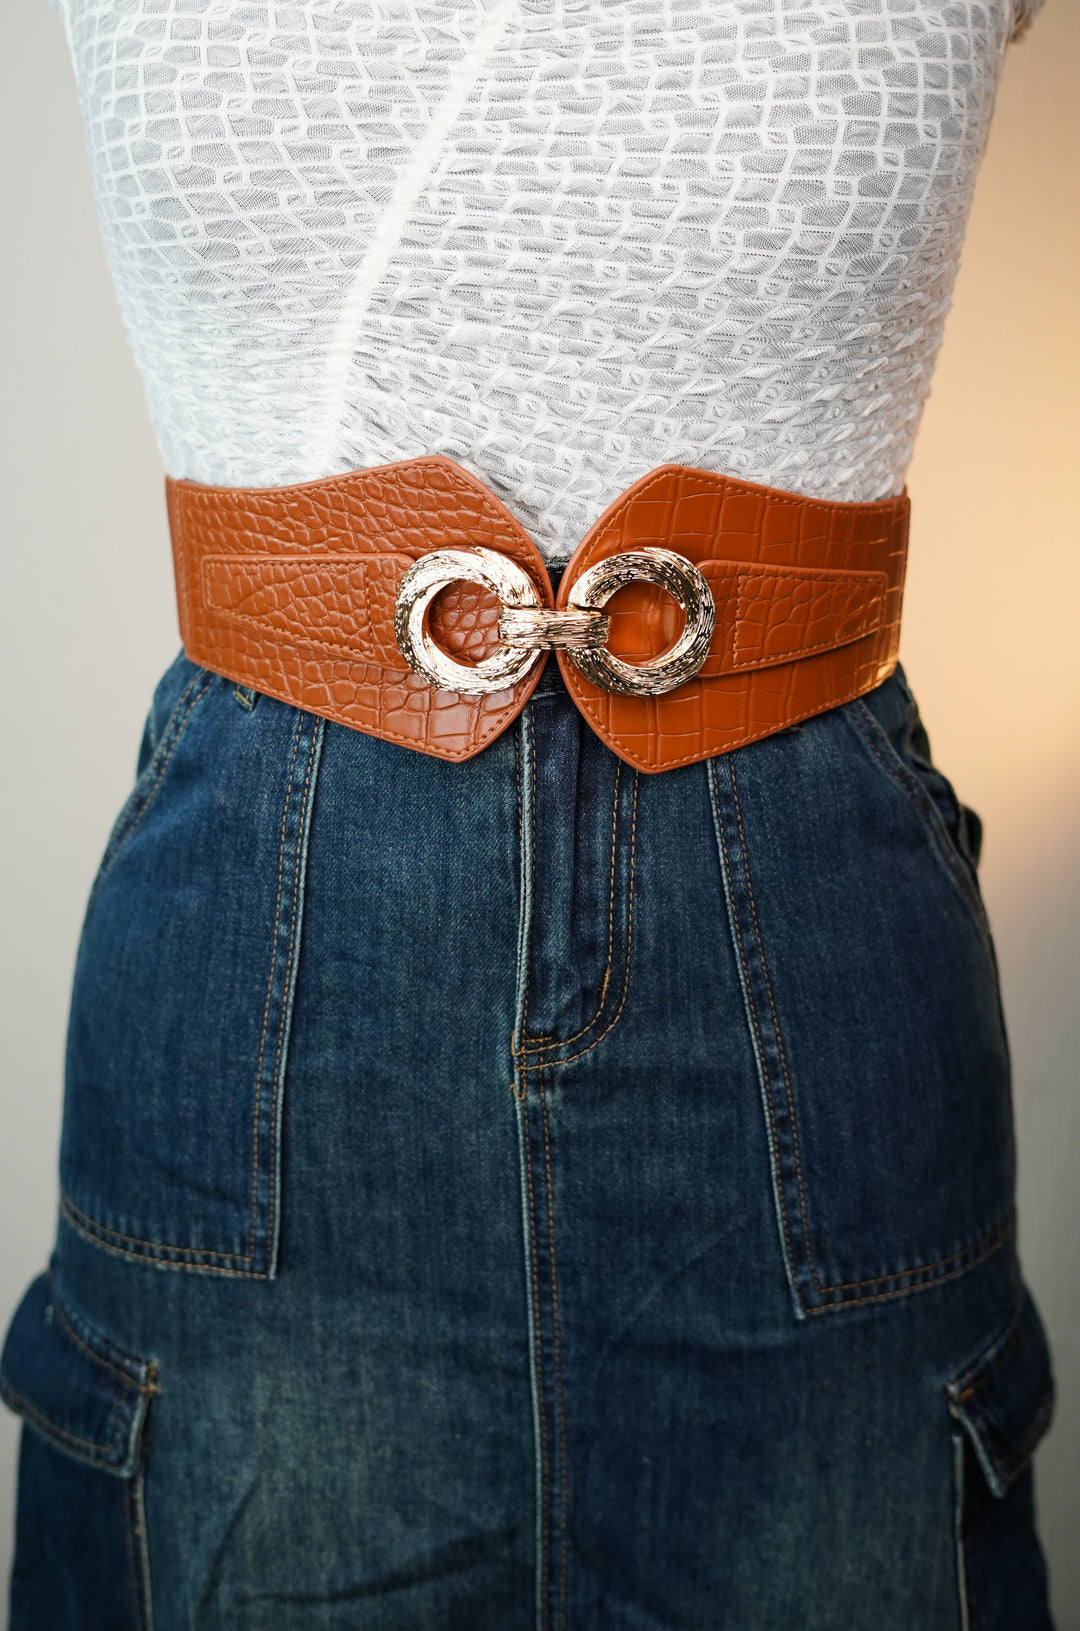 Richly Tanned Belt for Radiant Fashion with Hook